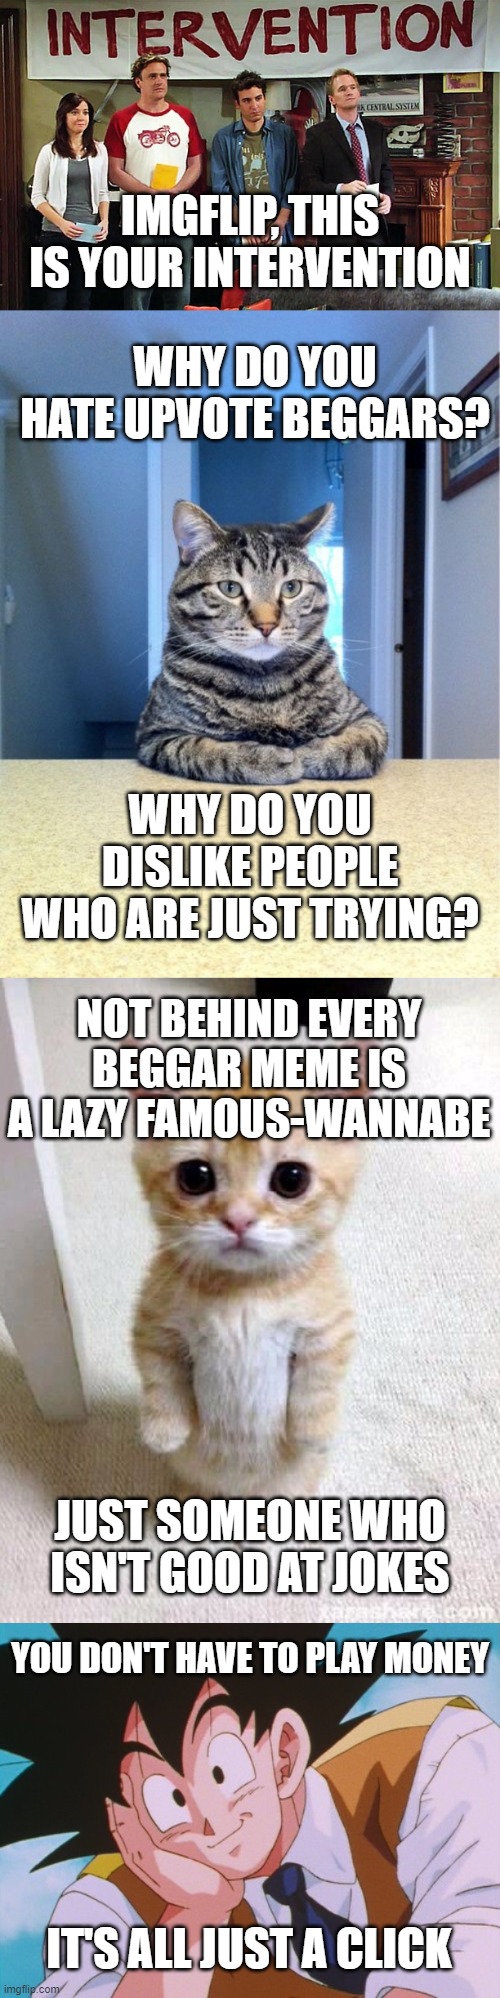 Just do it, It's free | IMGFLIP, THIS IS YOUR INTERVENTION; WHY DO YOU HATE UPVOTE BEGGARS? WHY DO YOU DISLIKE PEOPLE WHO ARE JUST TRYING? NOT BEHIND EVERY BEGGAR MEME IS A LAZY FAMOUS-WANNABE; JUST SOMEONE WHO ISN'T GOOD AT JOKES; YOU DON'T HAVE TO PLAY MONEY; IT'S ALL JUST A CLICK | image tagged in memes,take a seat cat,condescending goku,intervention,cute kitty,upvote begging | made w/ Imgflip meme maker